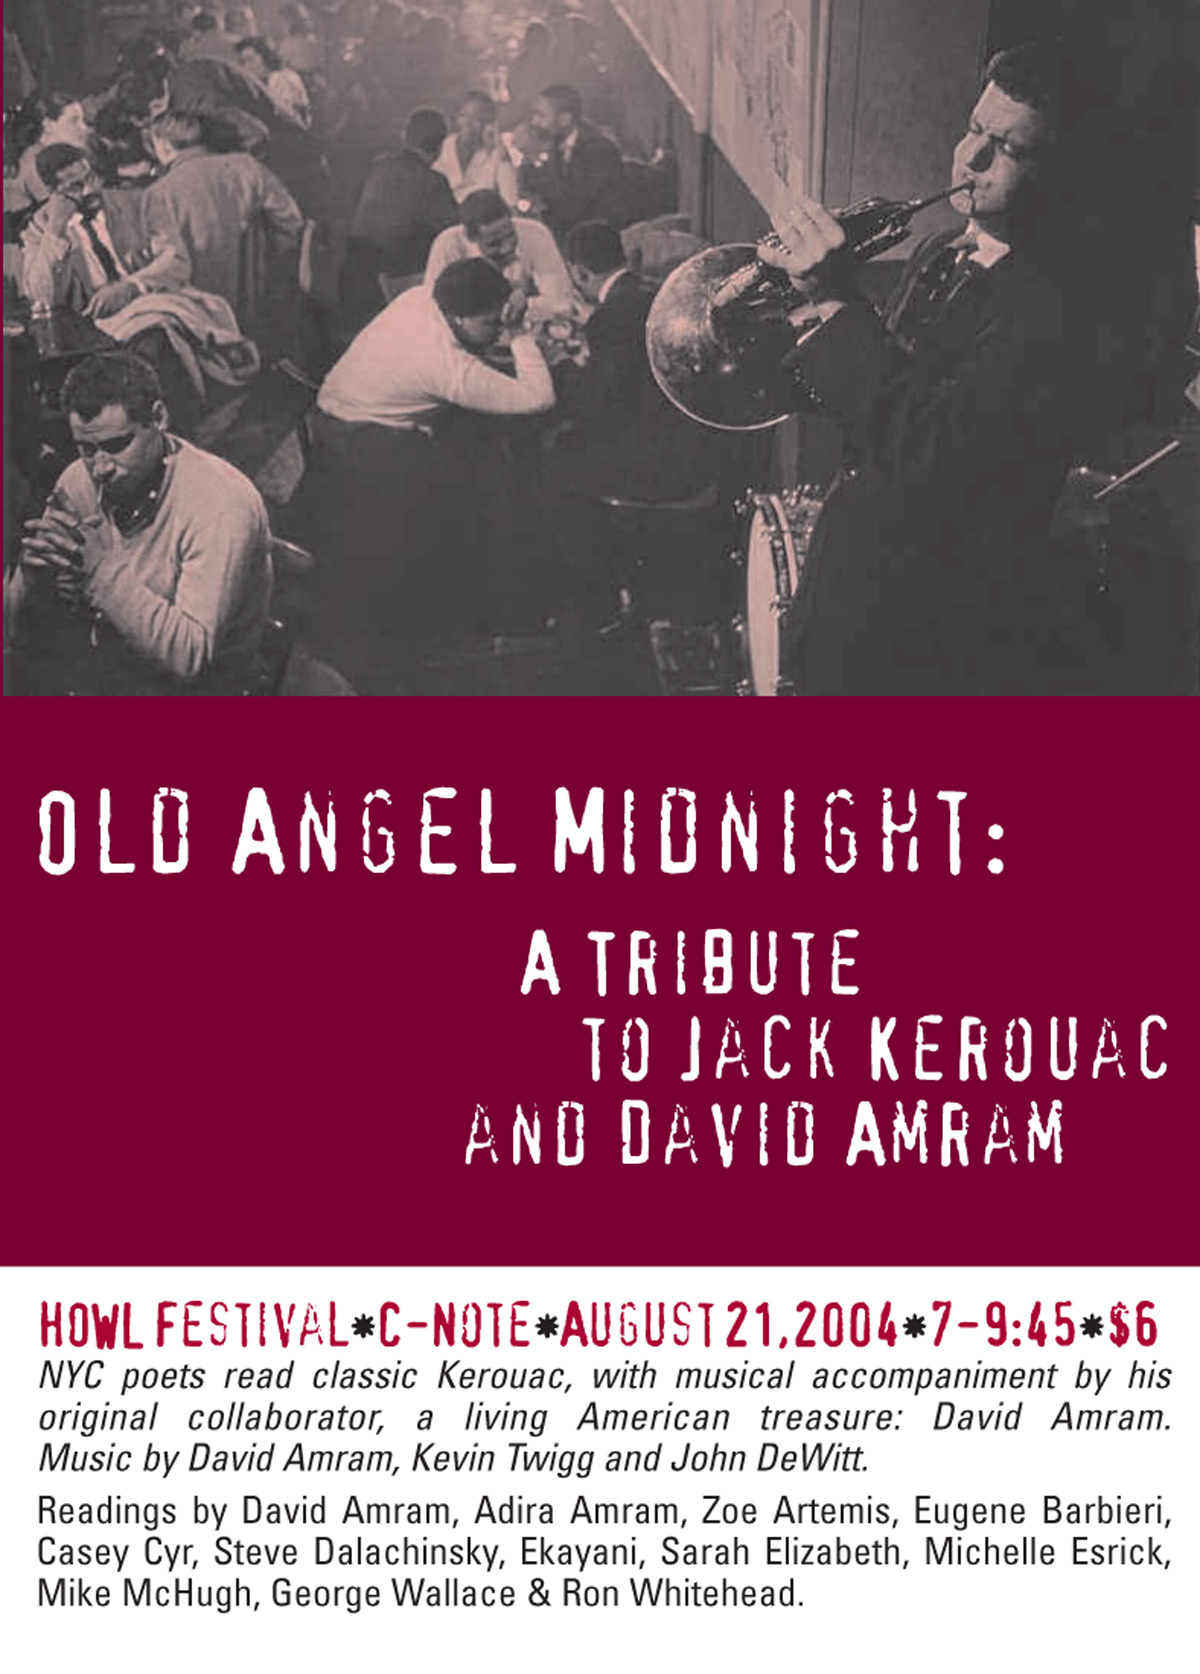 Howl Festival NYC 2004 - A reading of Jack Kerouac's Old Angel Midnight